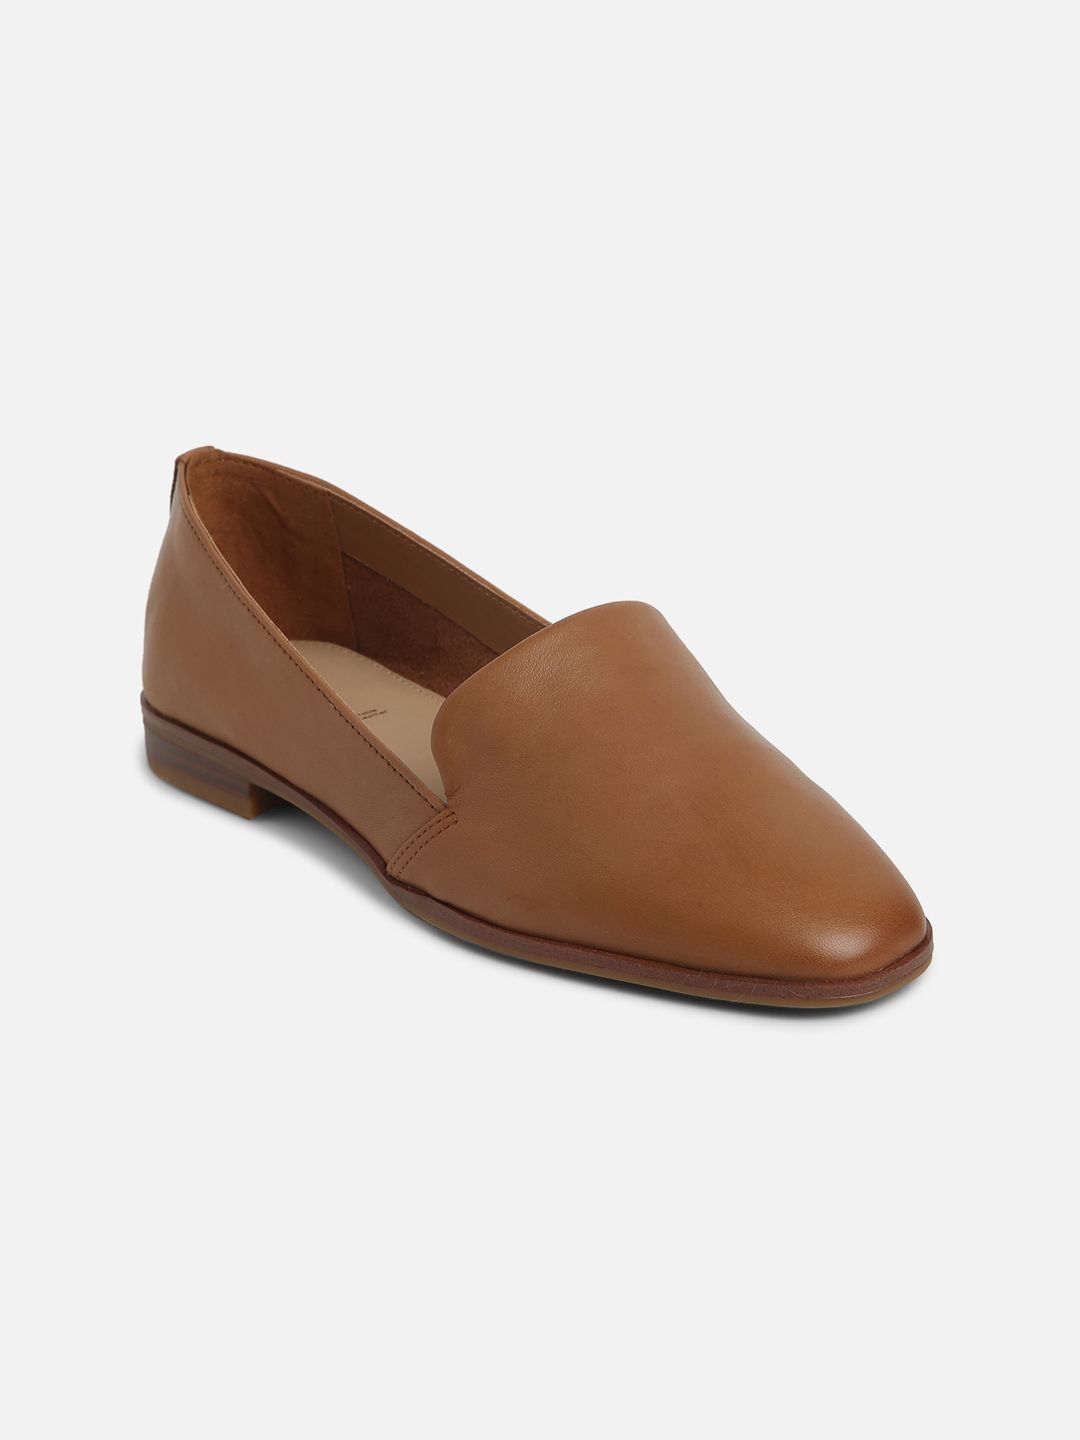 ALDO Women Brown Leather Slip-On Casual shoes Price in India